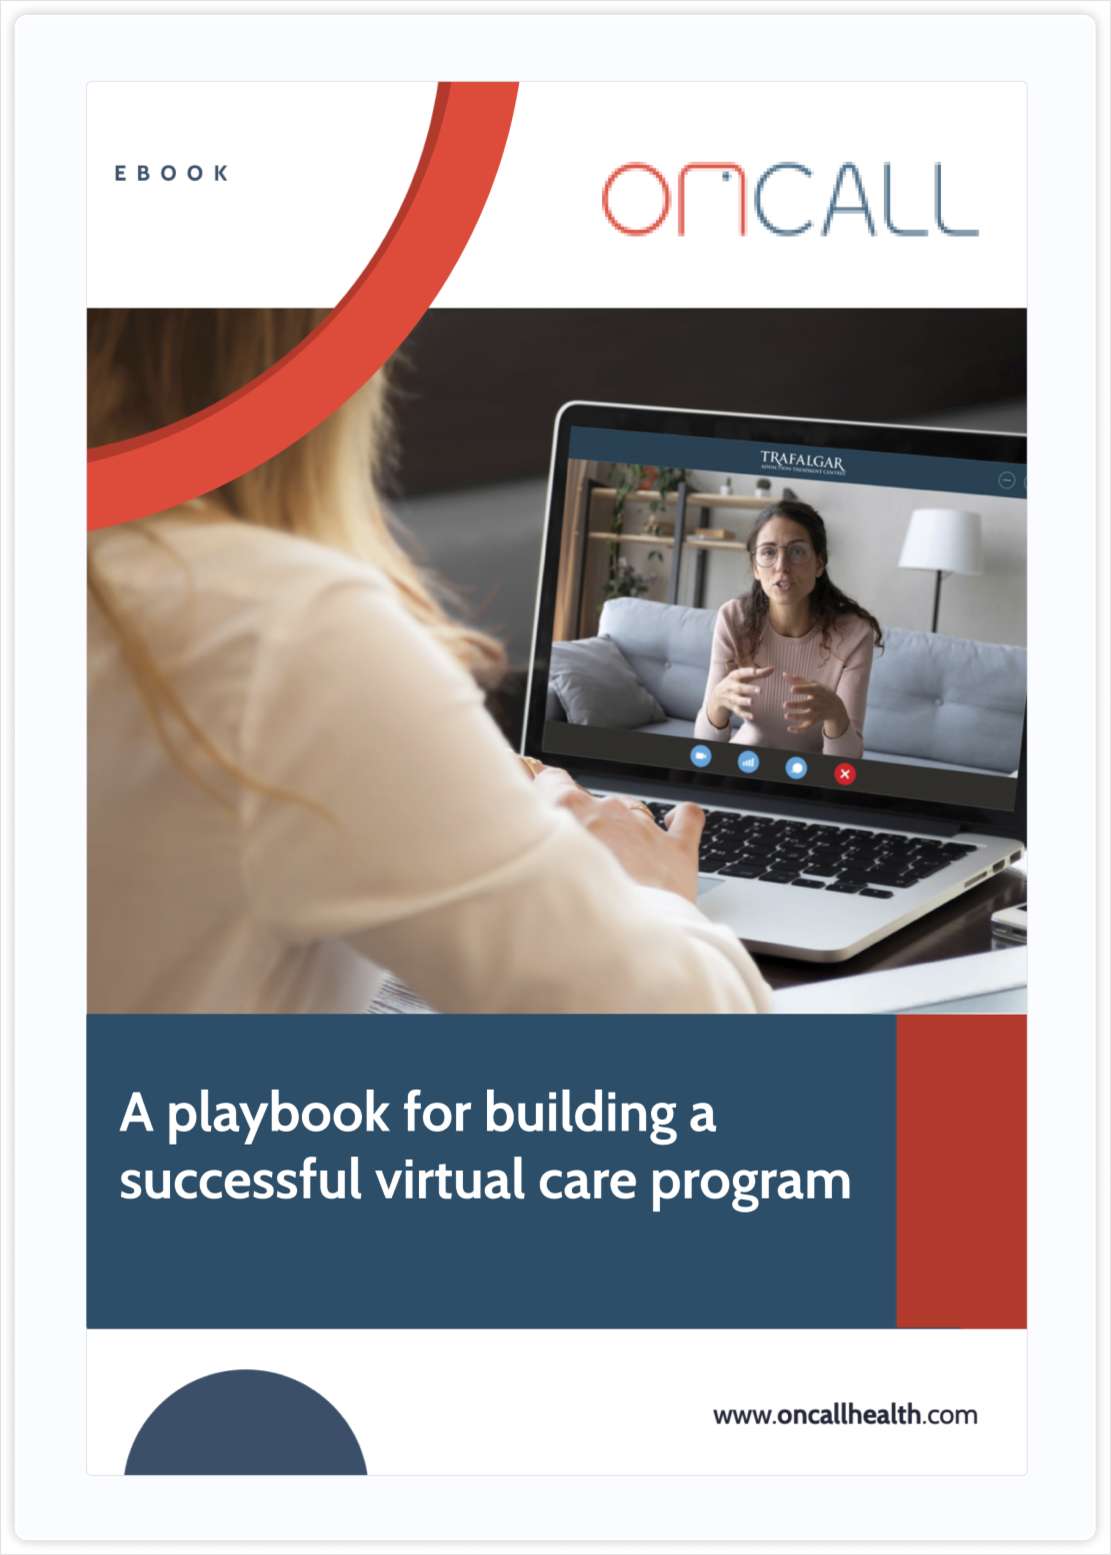 A playbook for building a successful virtual care program